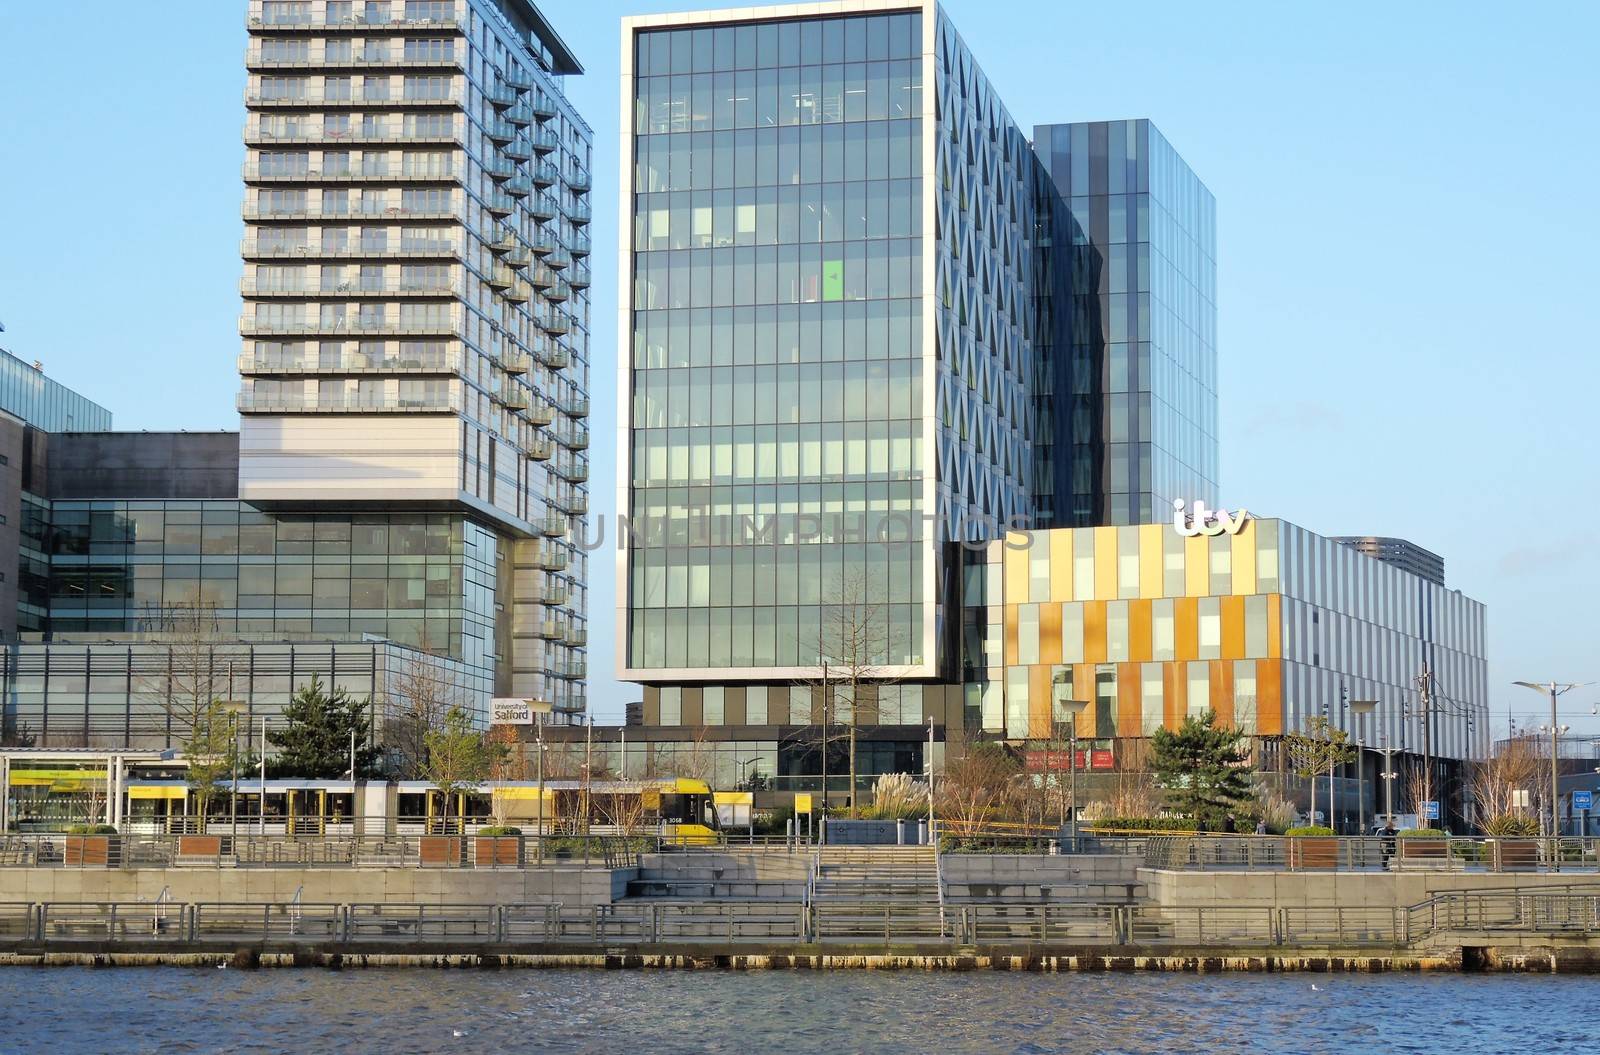 An image of television studios at Media city in Salford Quays, Greater Manchester.